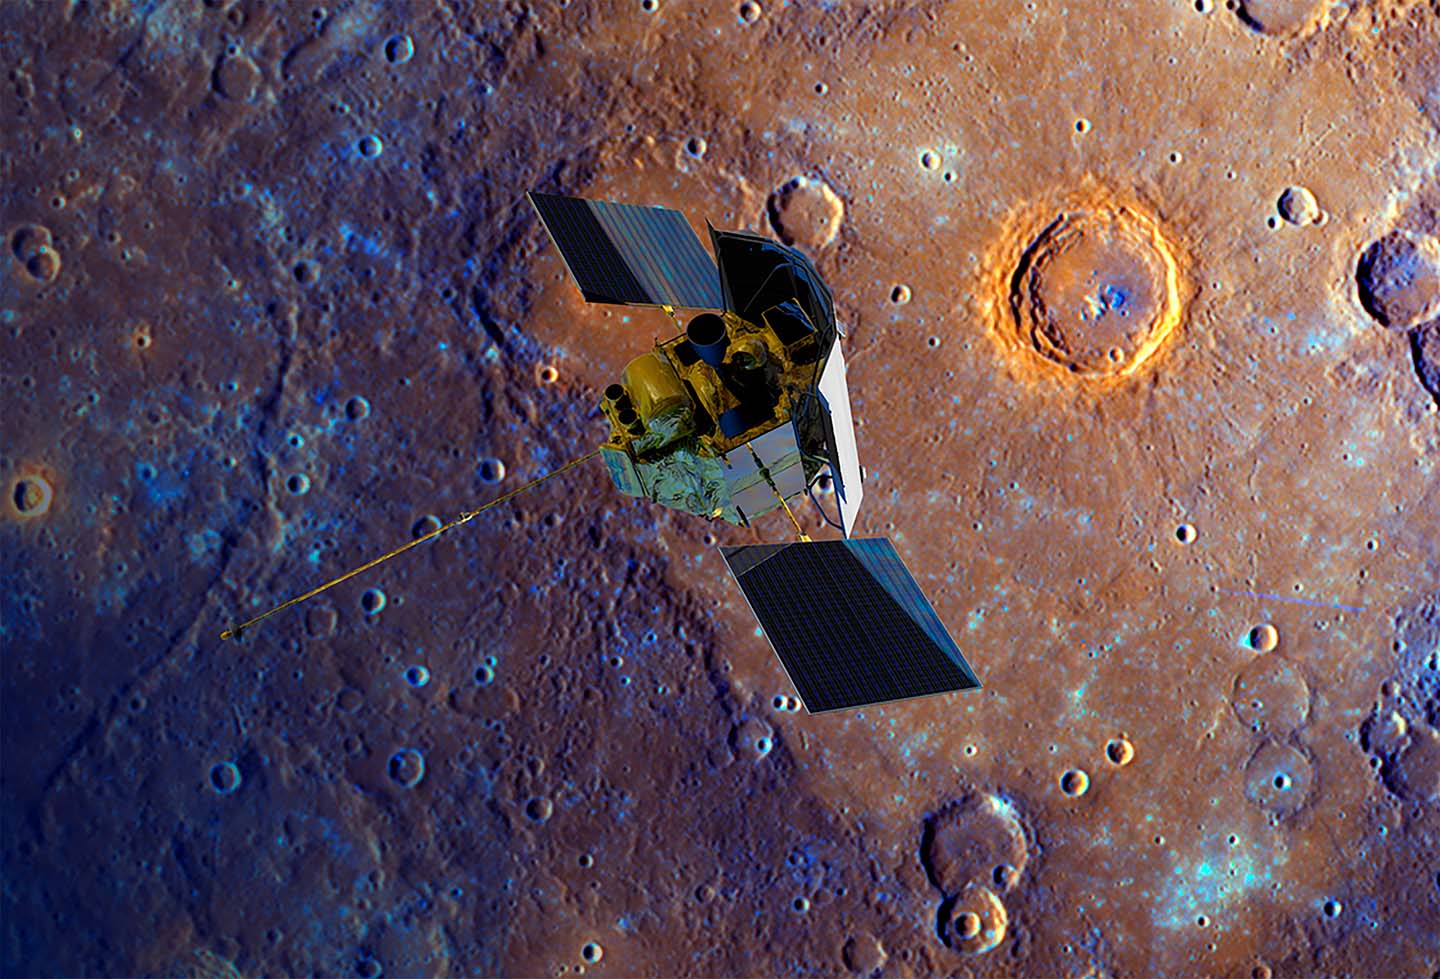 Artist’s impression of the APL-built and -operated MESSENGER spacecraft over the cratered surface of Mercury. 